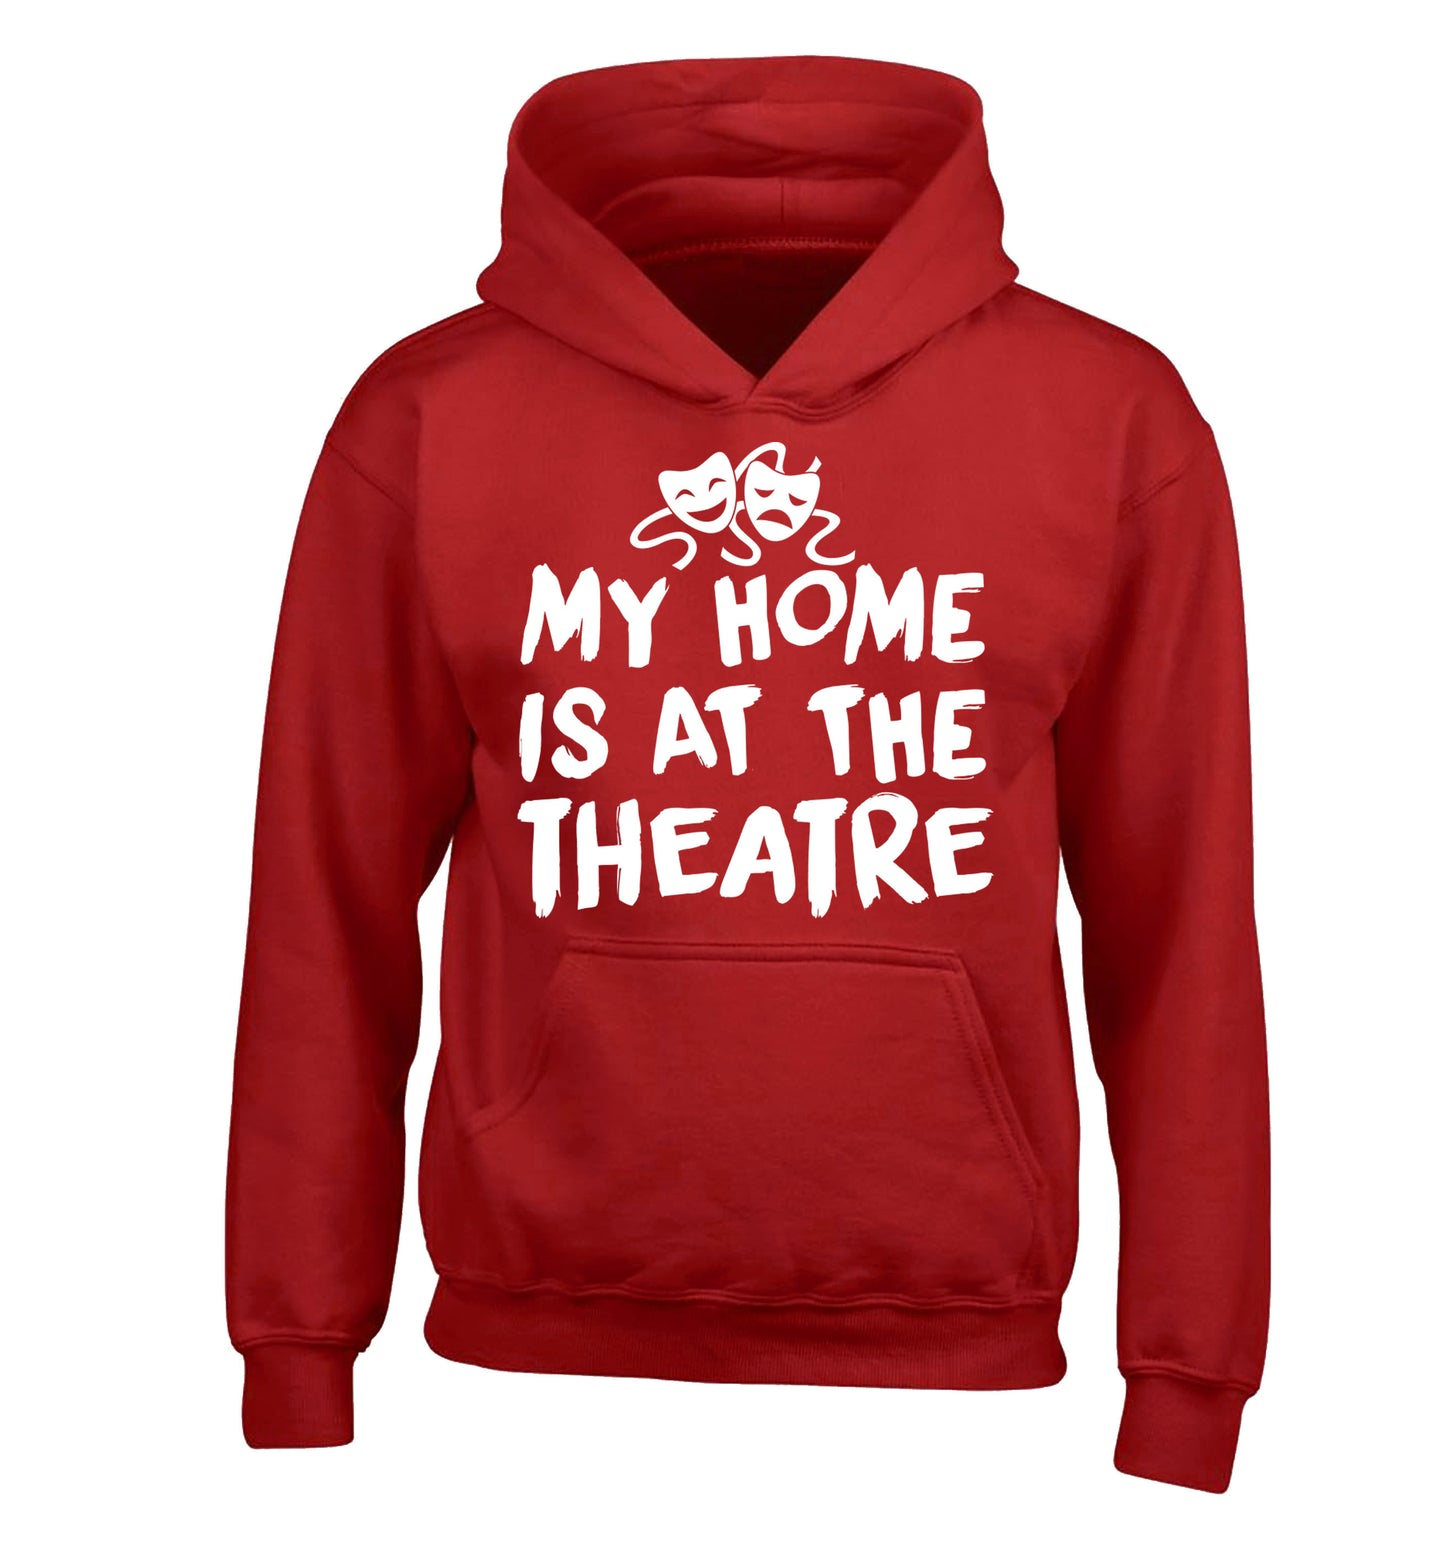 My home is at the theatre children's red hoodie 12-14 Years